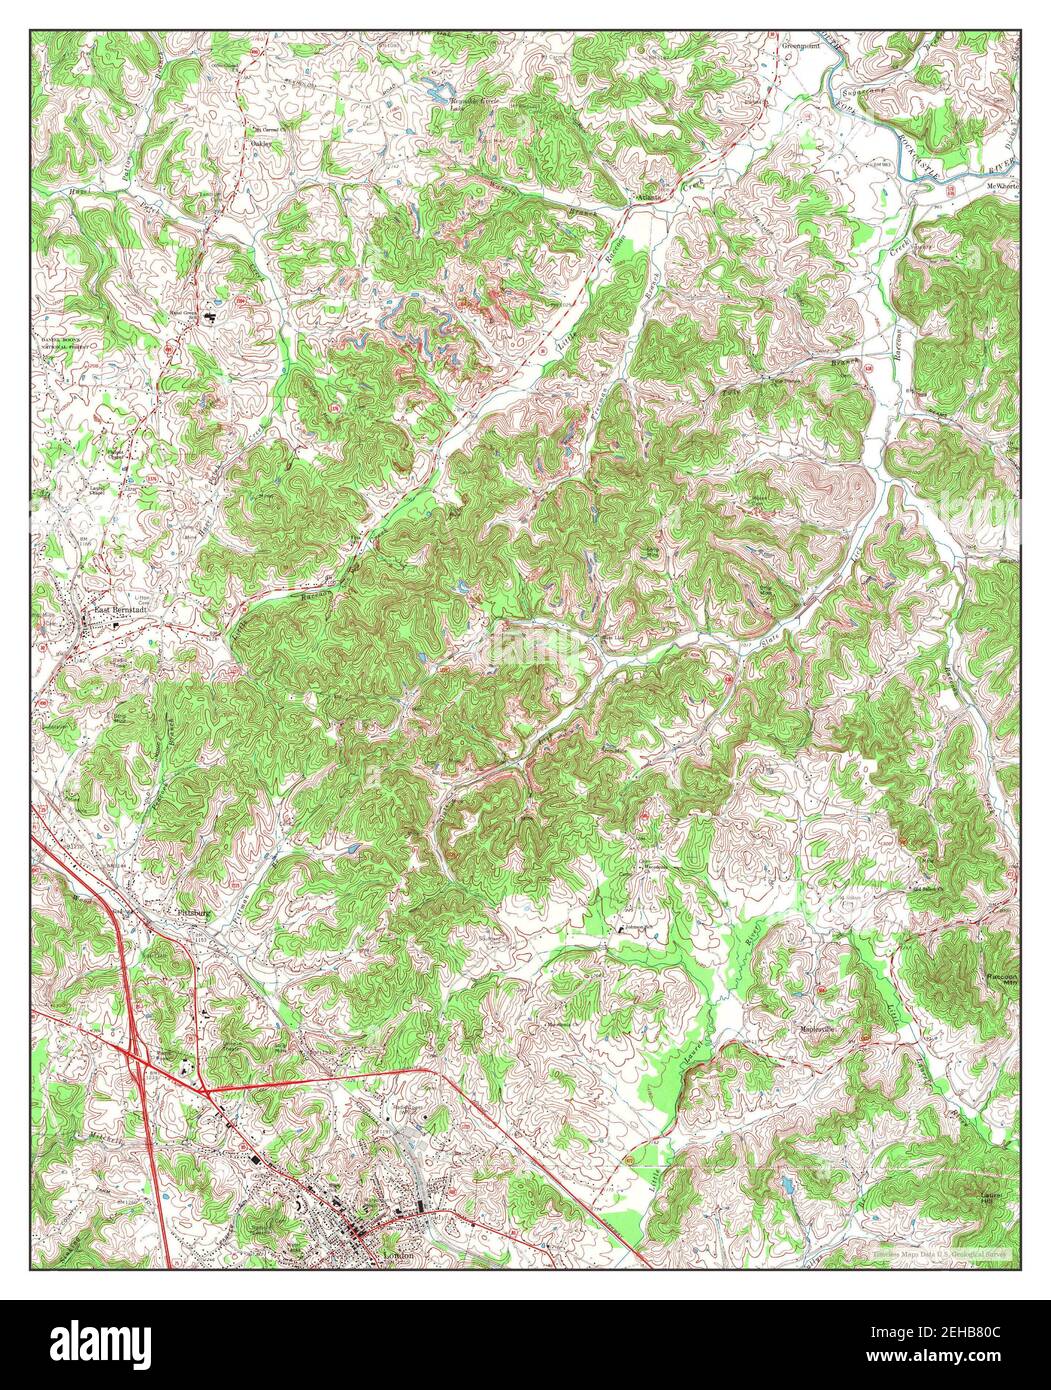 London, Kentucky, map 1969, 1:24000, United States of America by Timeless Maps, data U.S. Geological Survey Stock Photo